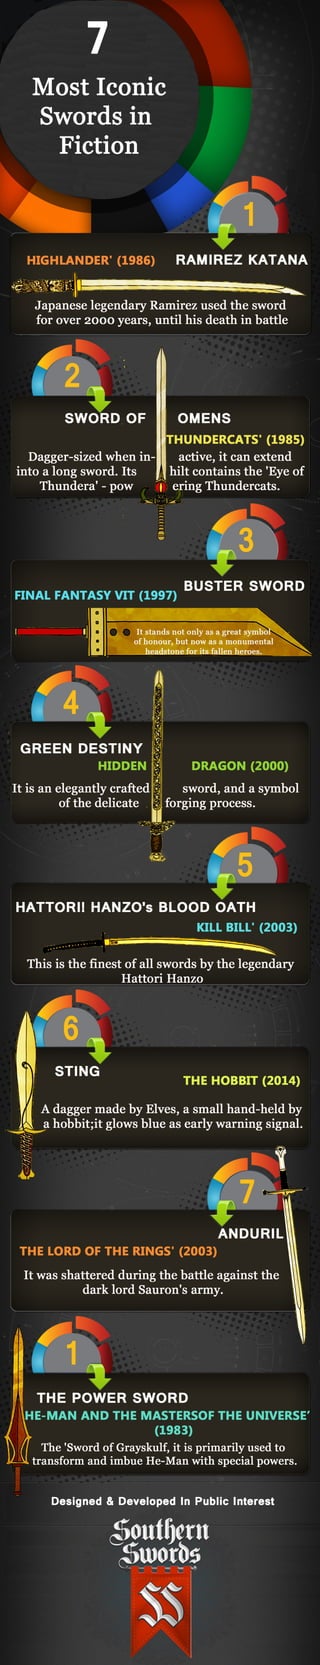 7 most iconic swords in fiction